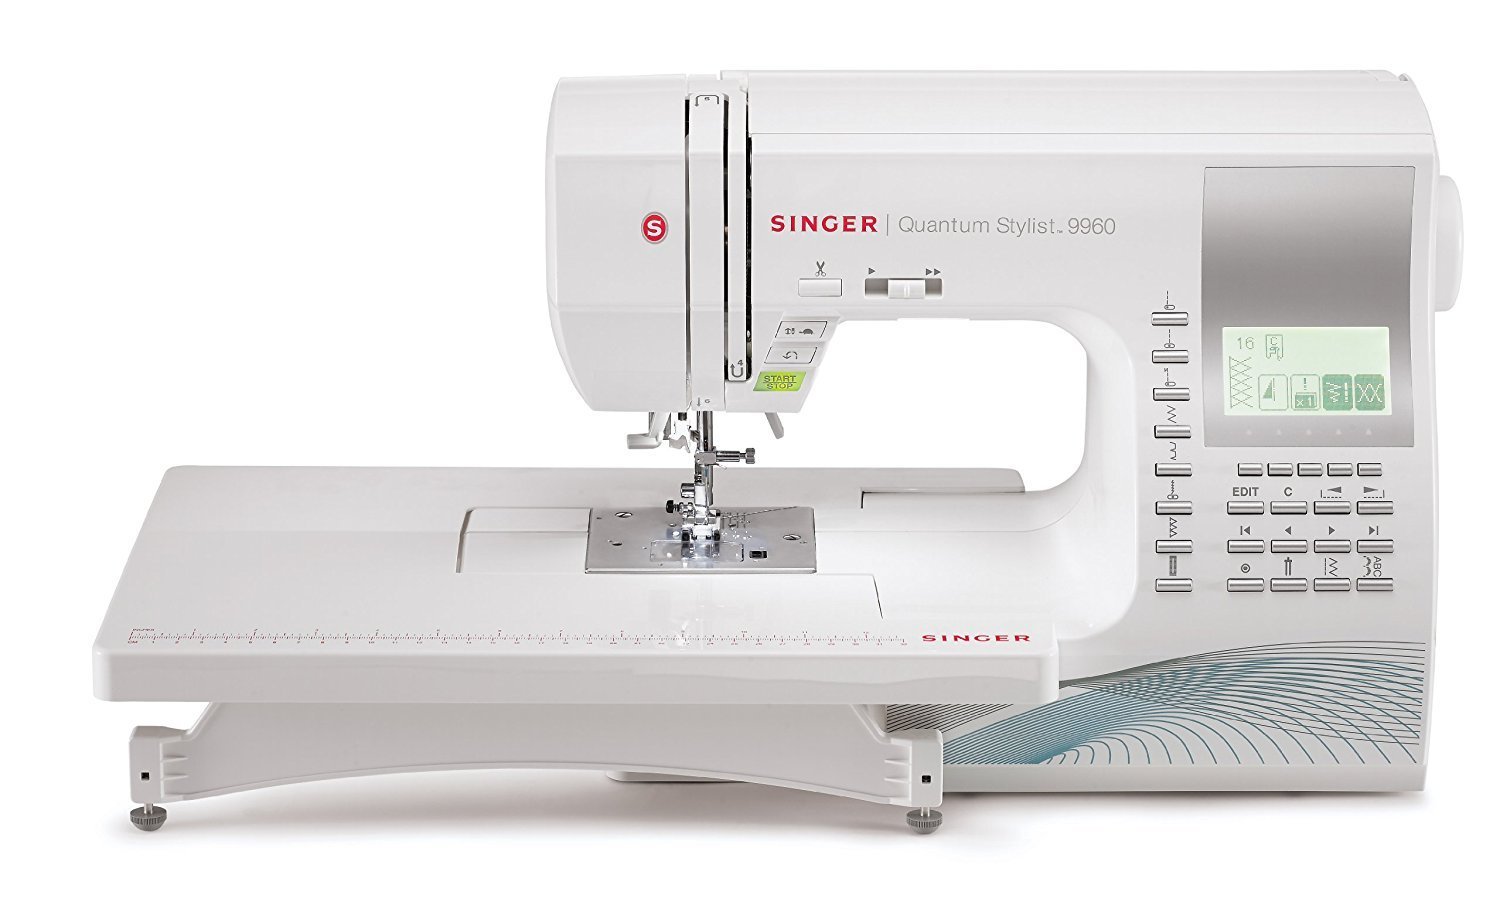 Tips For Buying the Best Sewing Machine for Quilting